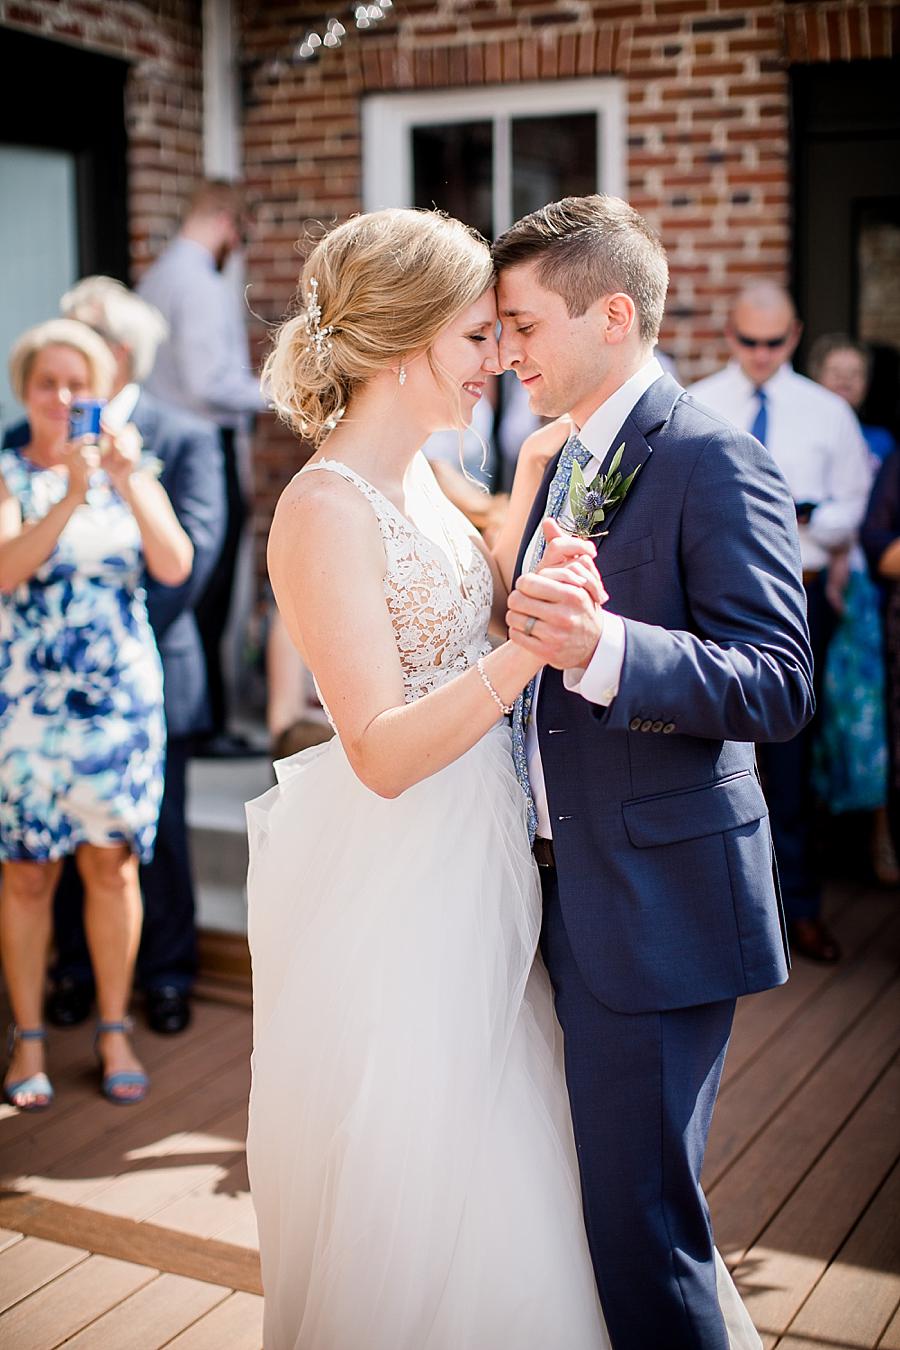 First dance at this Upstairs at Midtown Wedding by Knoxville Wedding Photographer, Amanda May Photos.